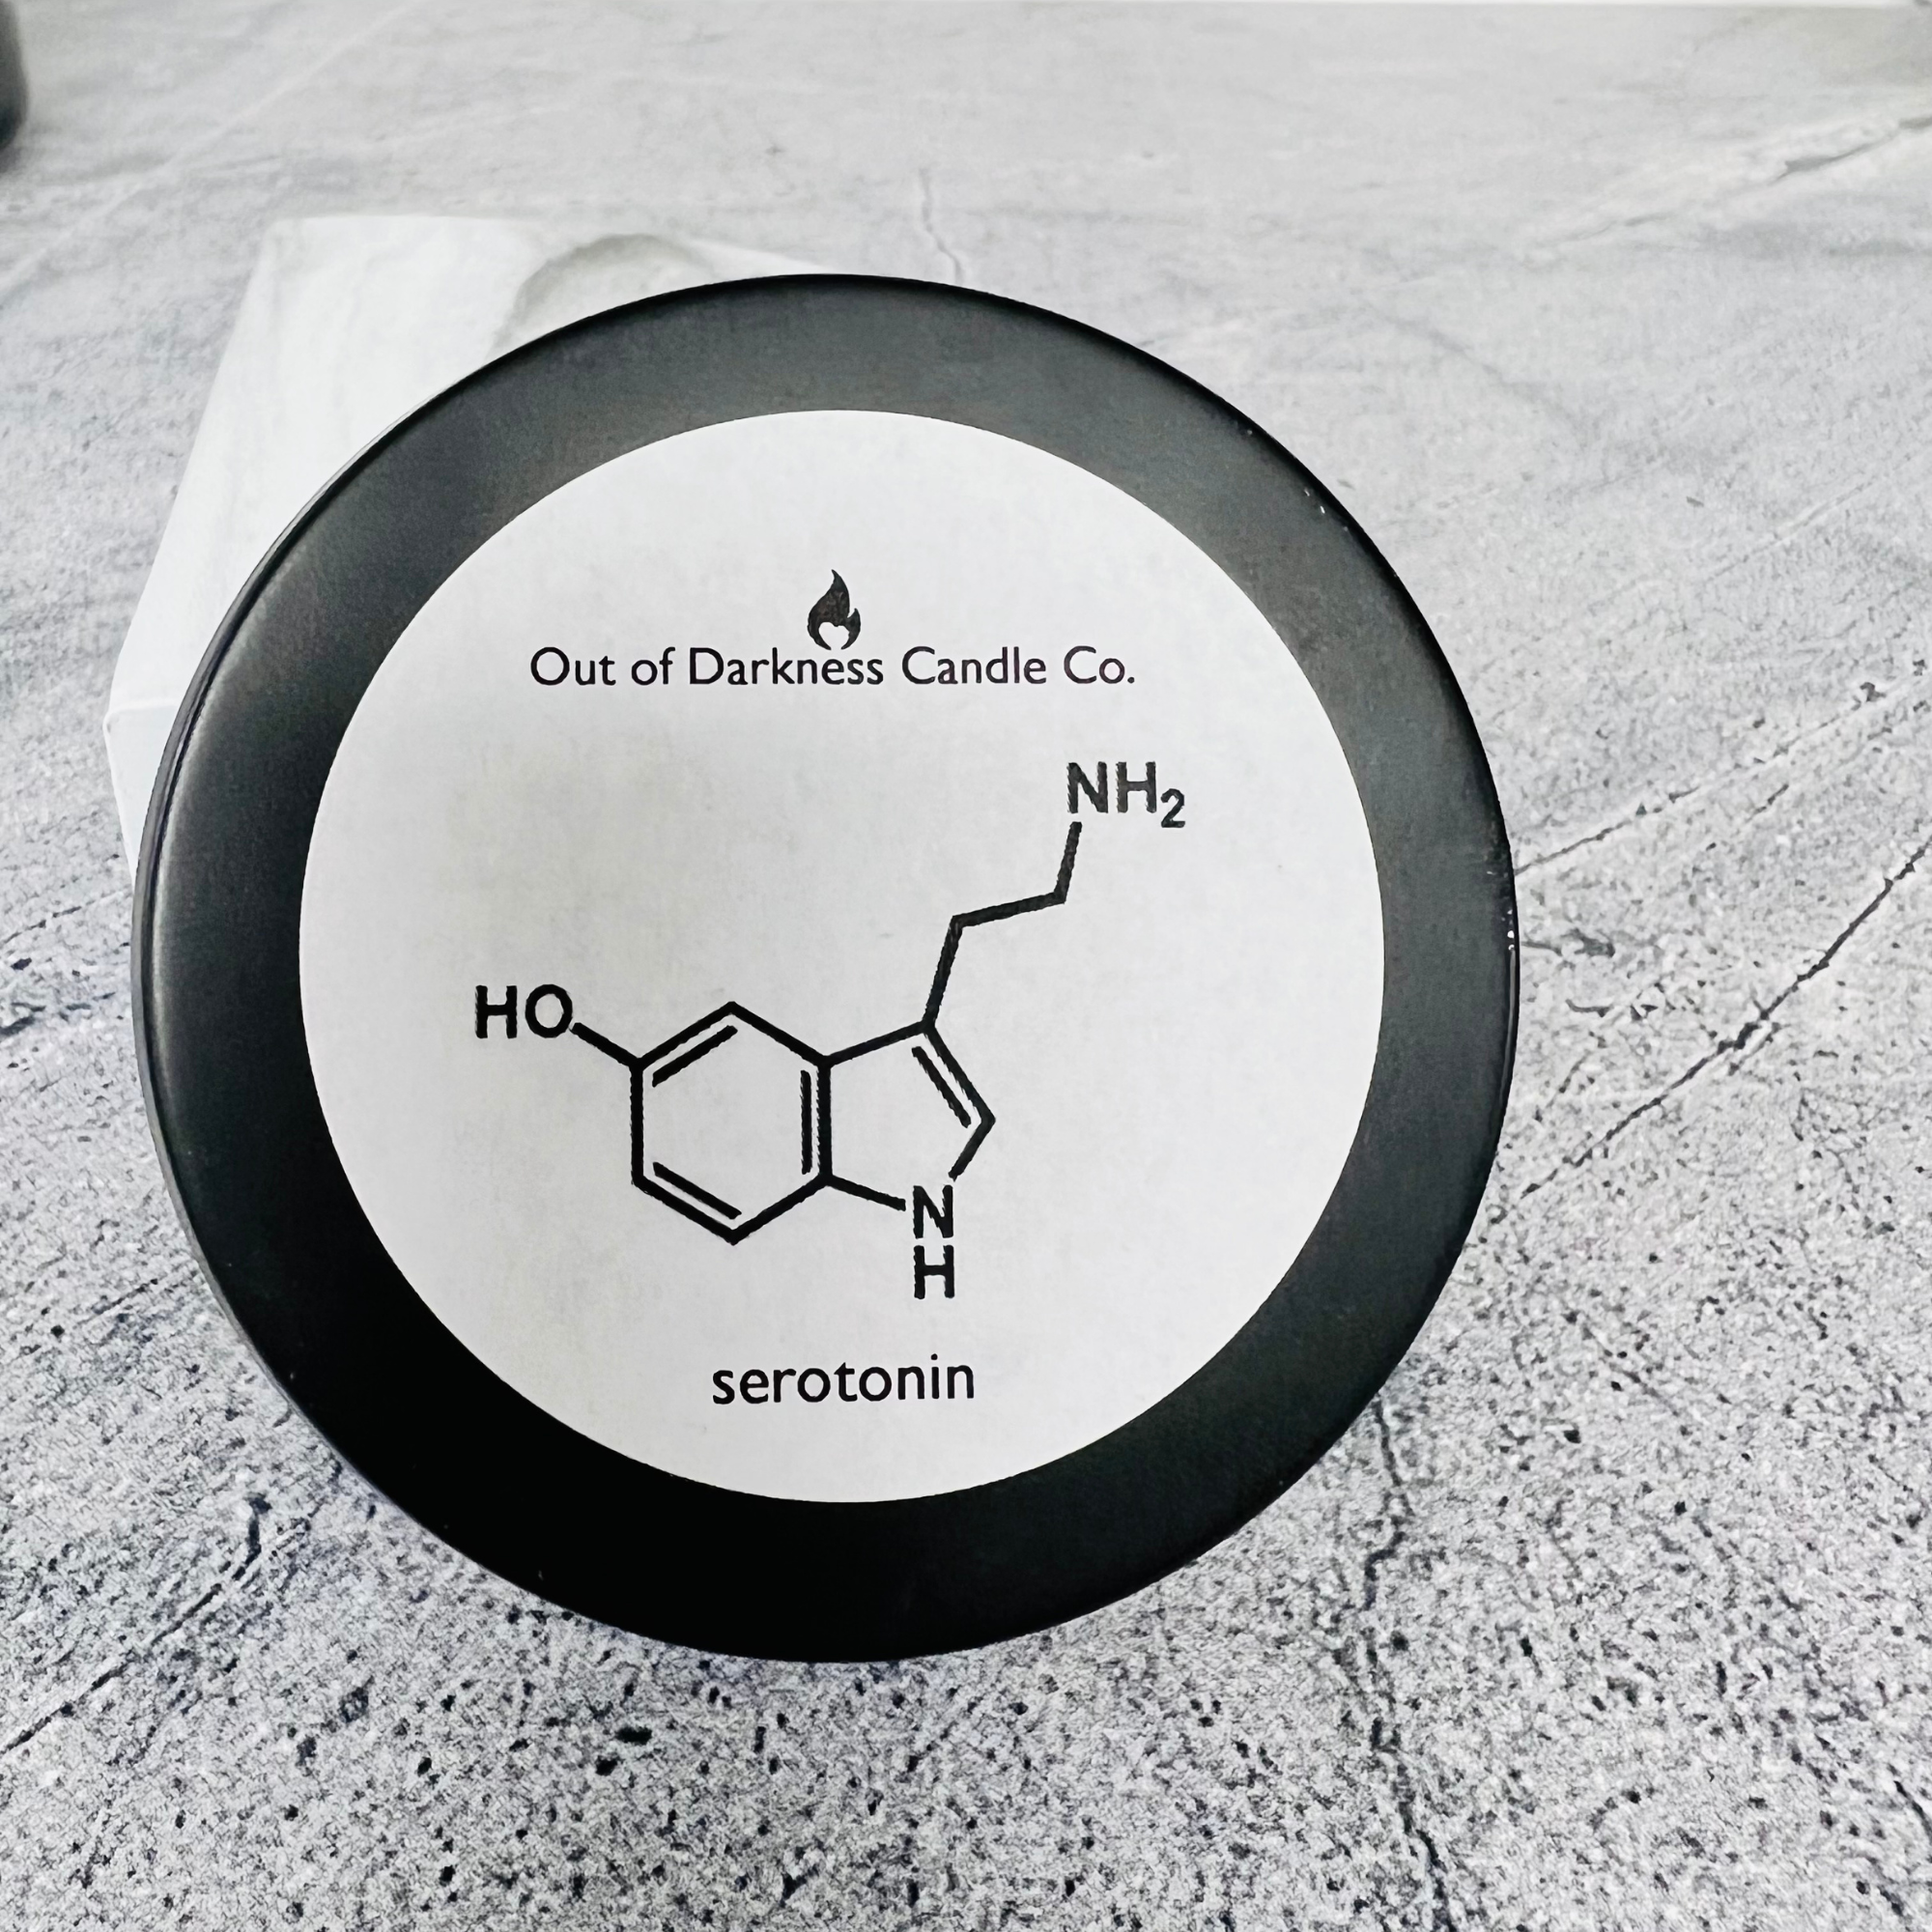 black tin candle with white label showing serotonin molecule